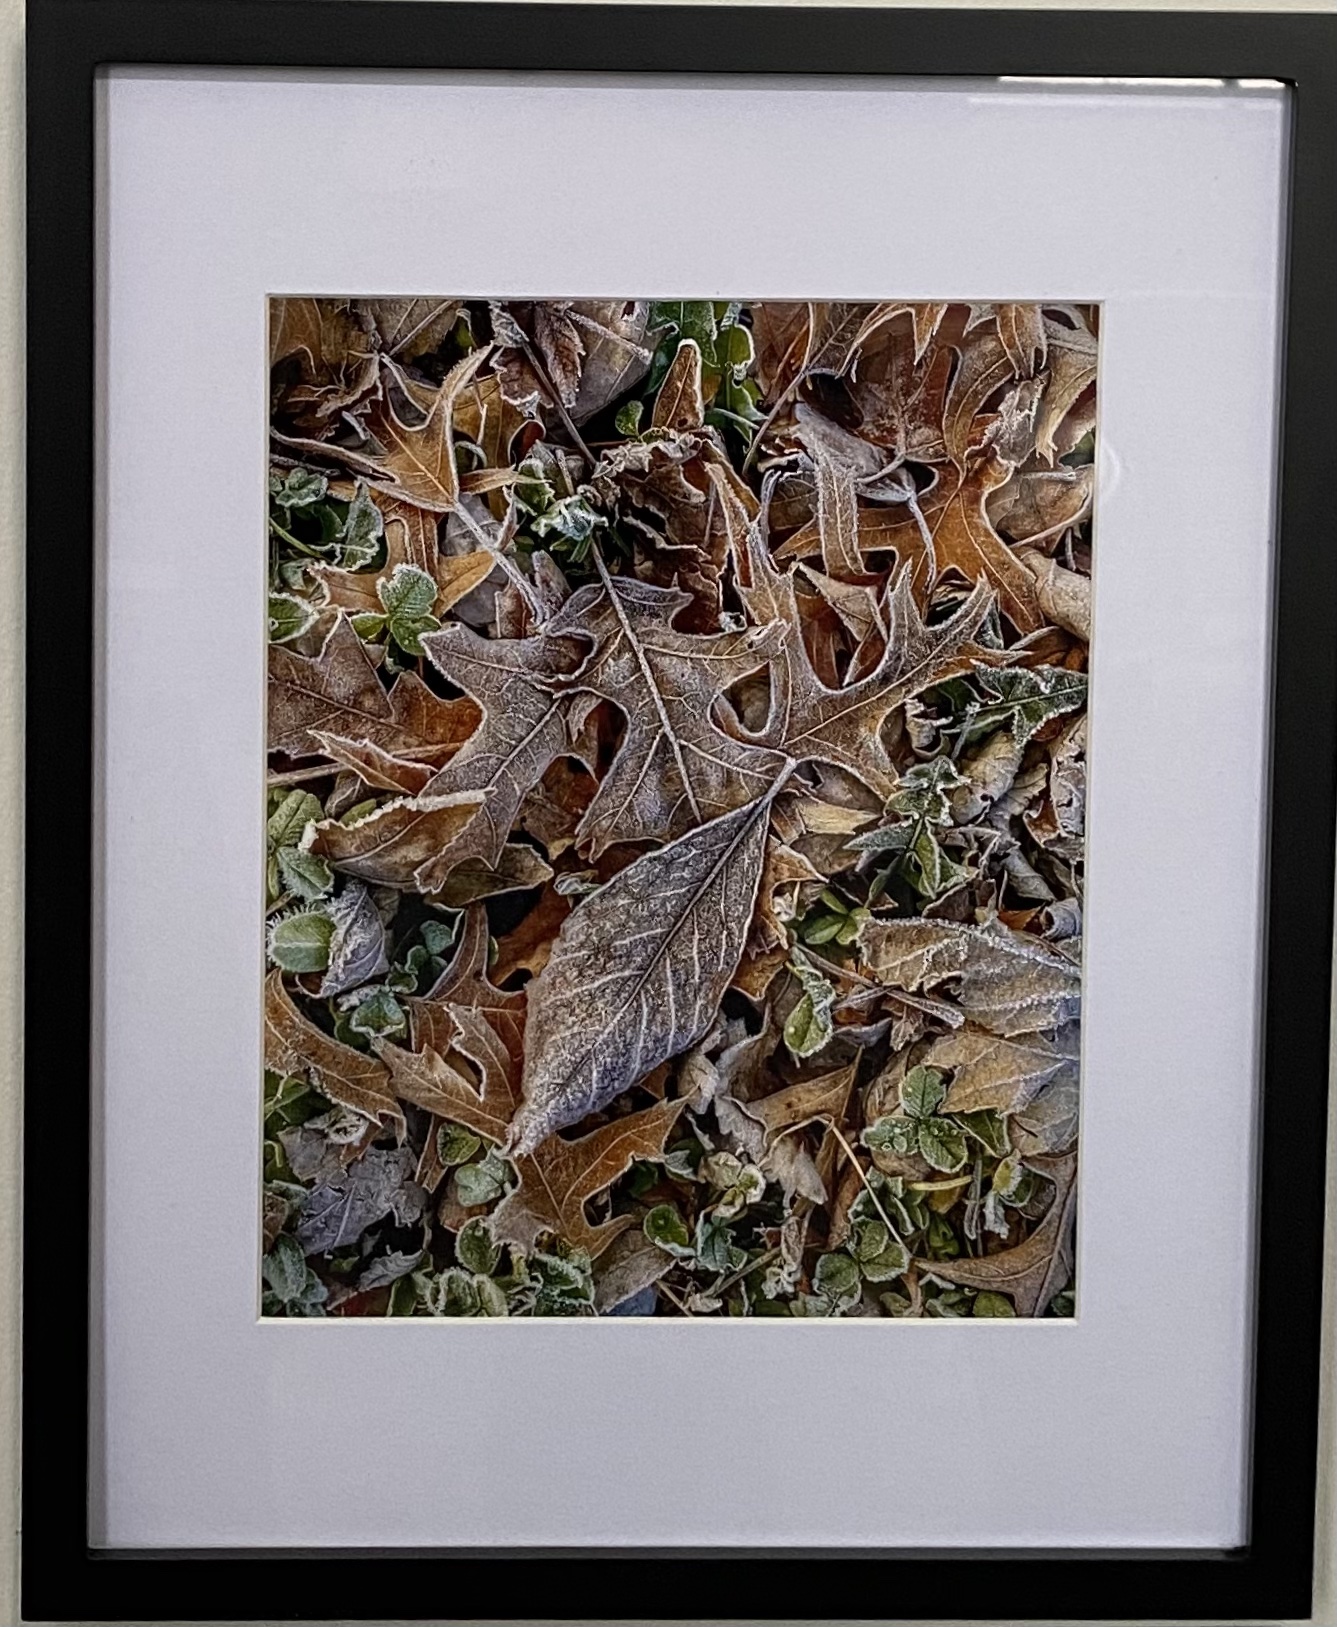 Autumn Frost
Photography
8" X 10"
$95.